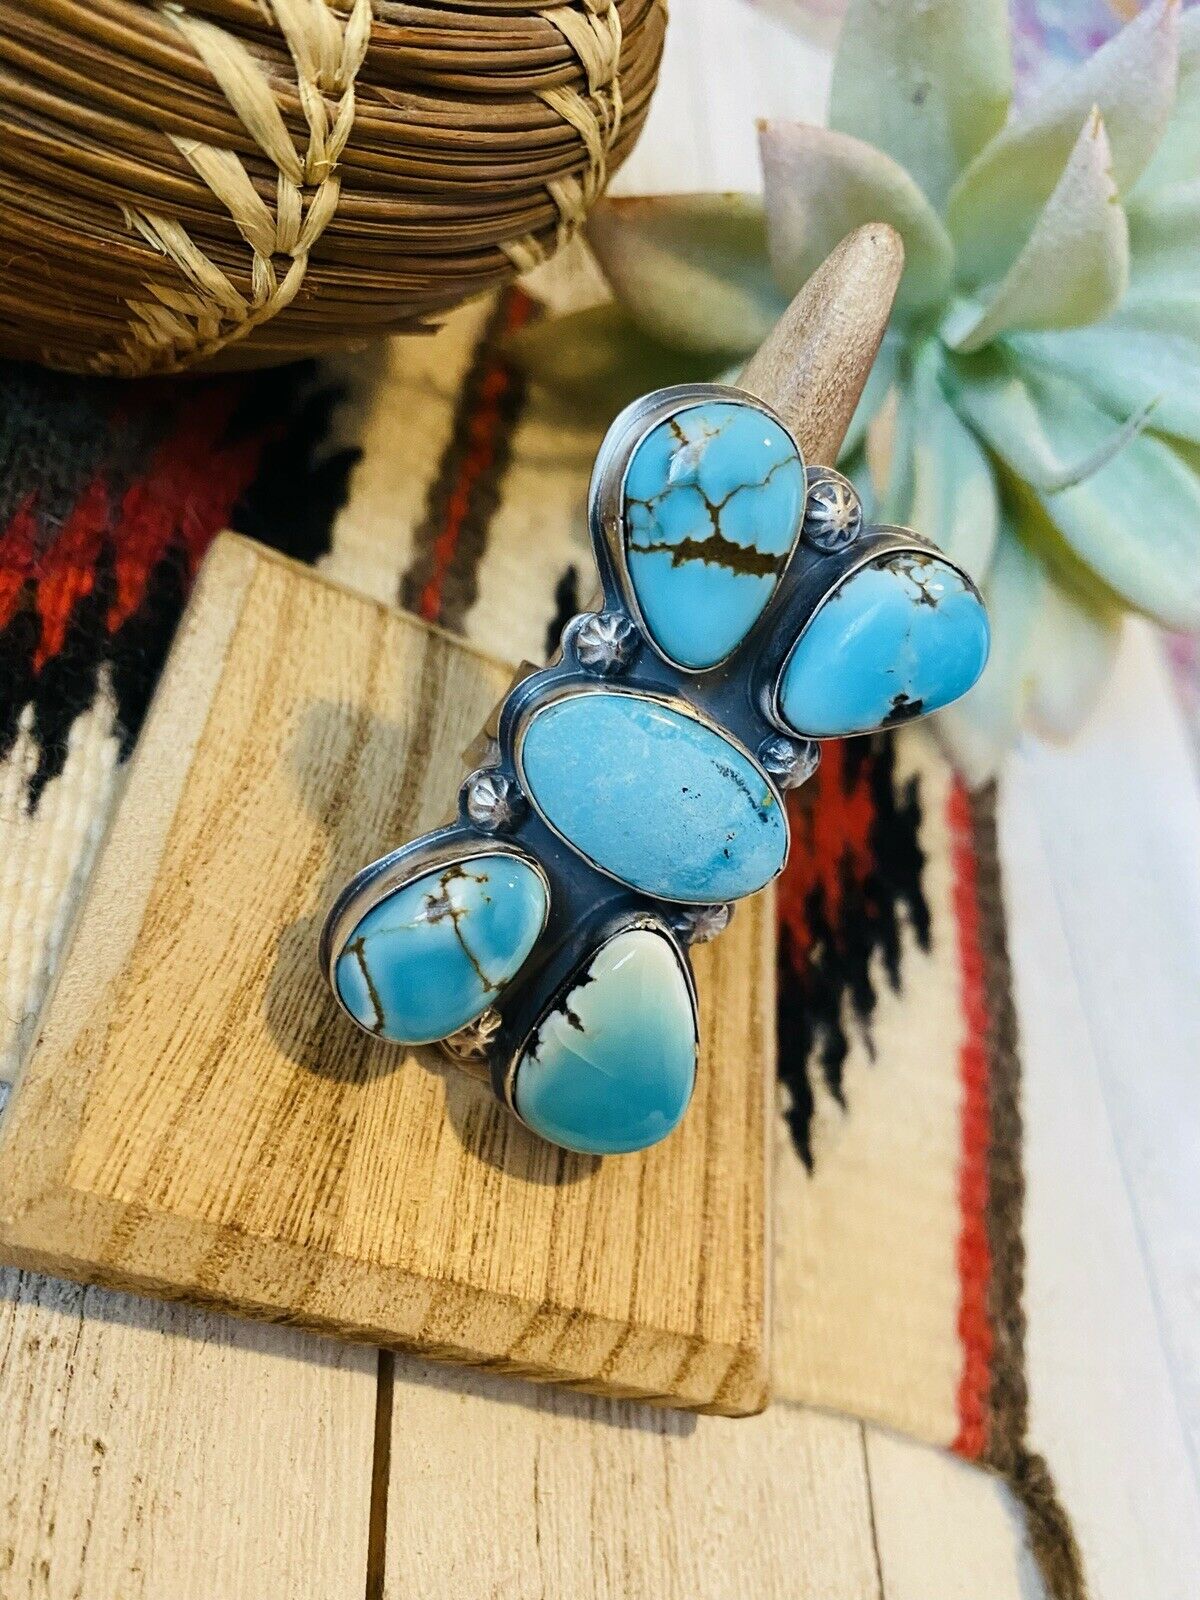 Navajo Turquoise & Sterling Silver Adjustable Ring Signed